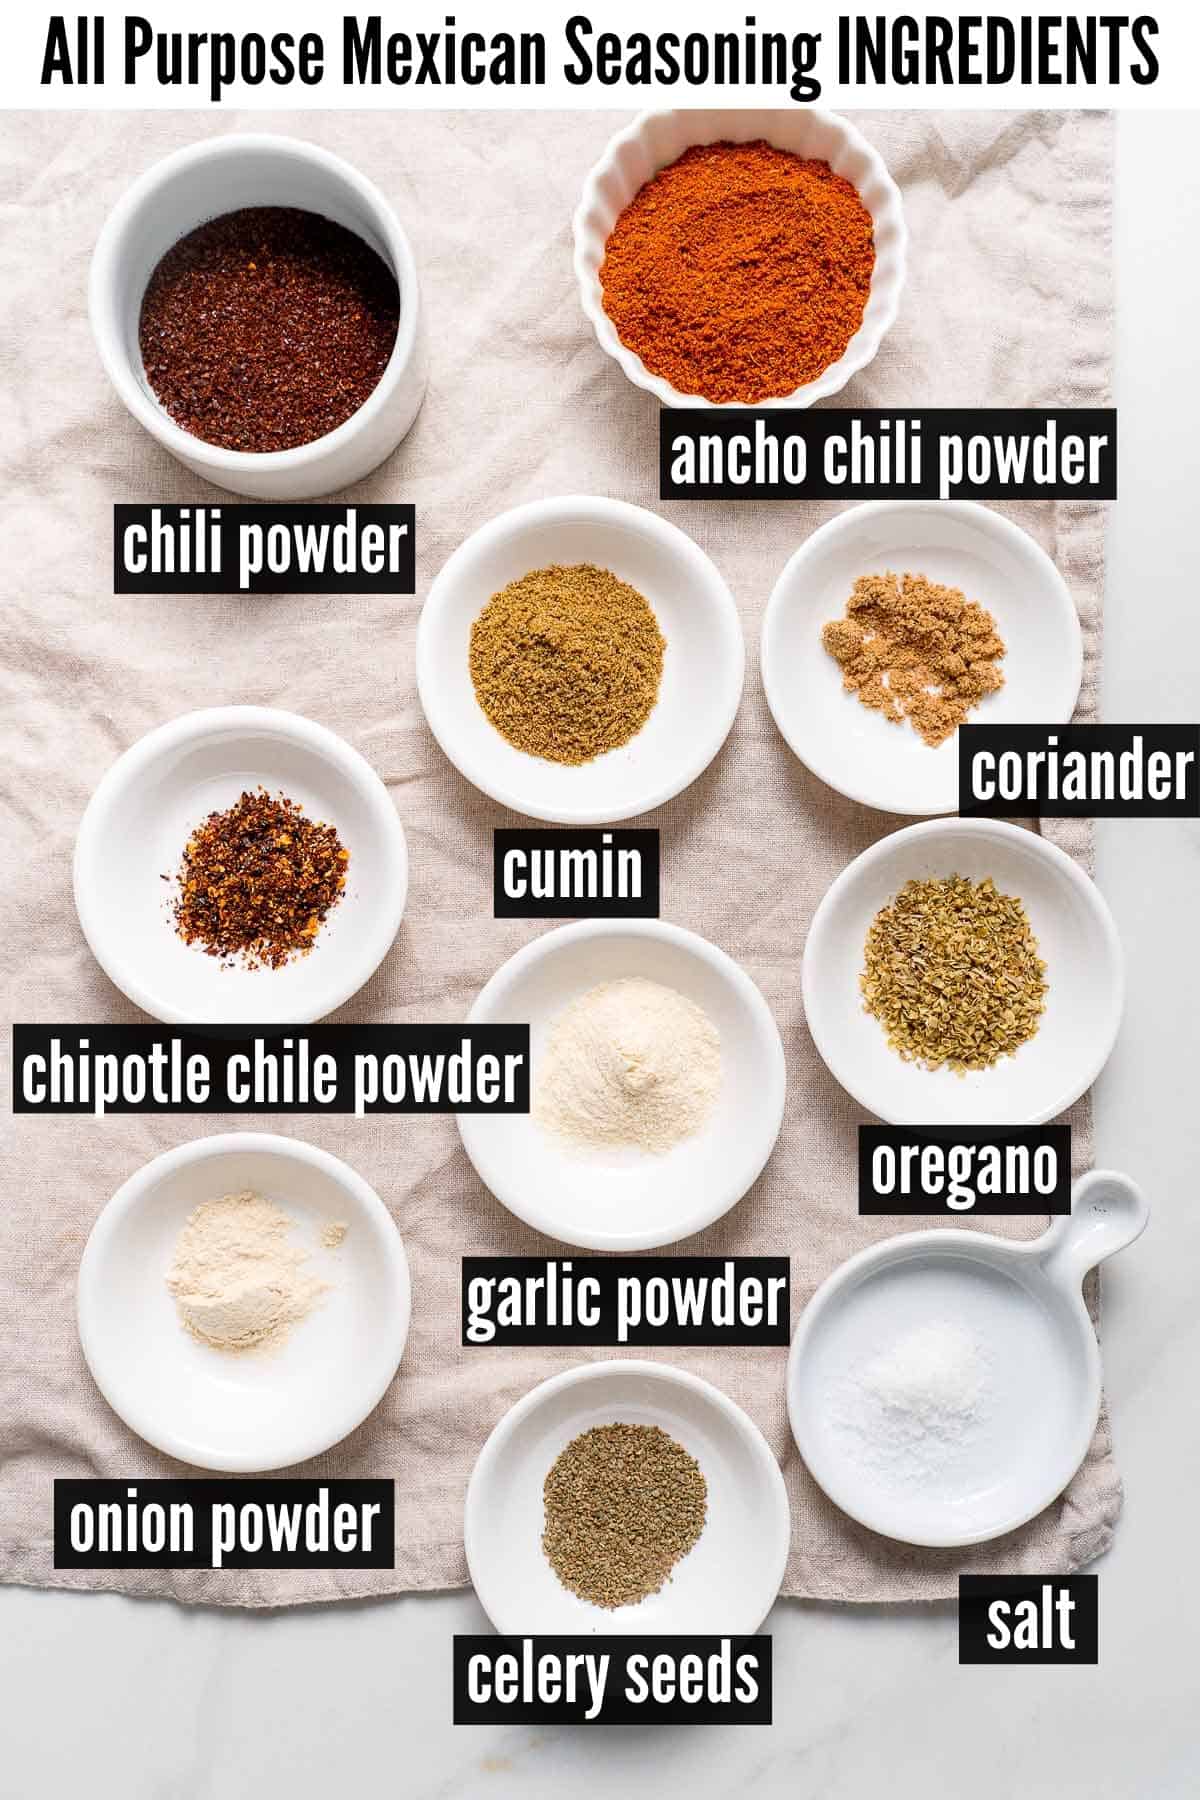 all purpose mexican seasoning labelled ingredients.